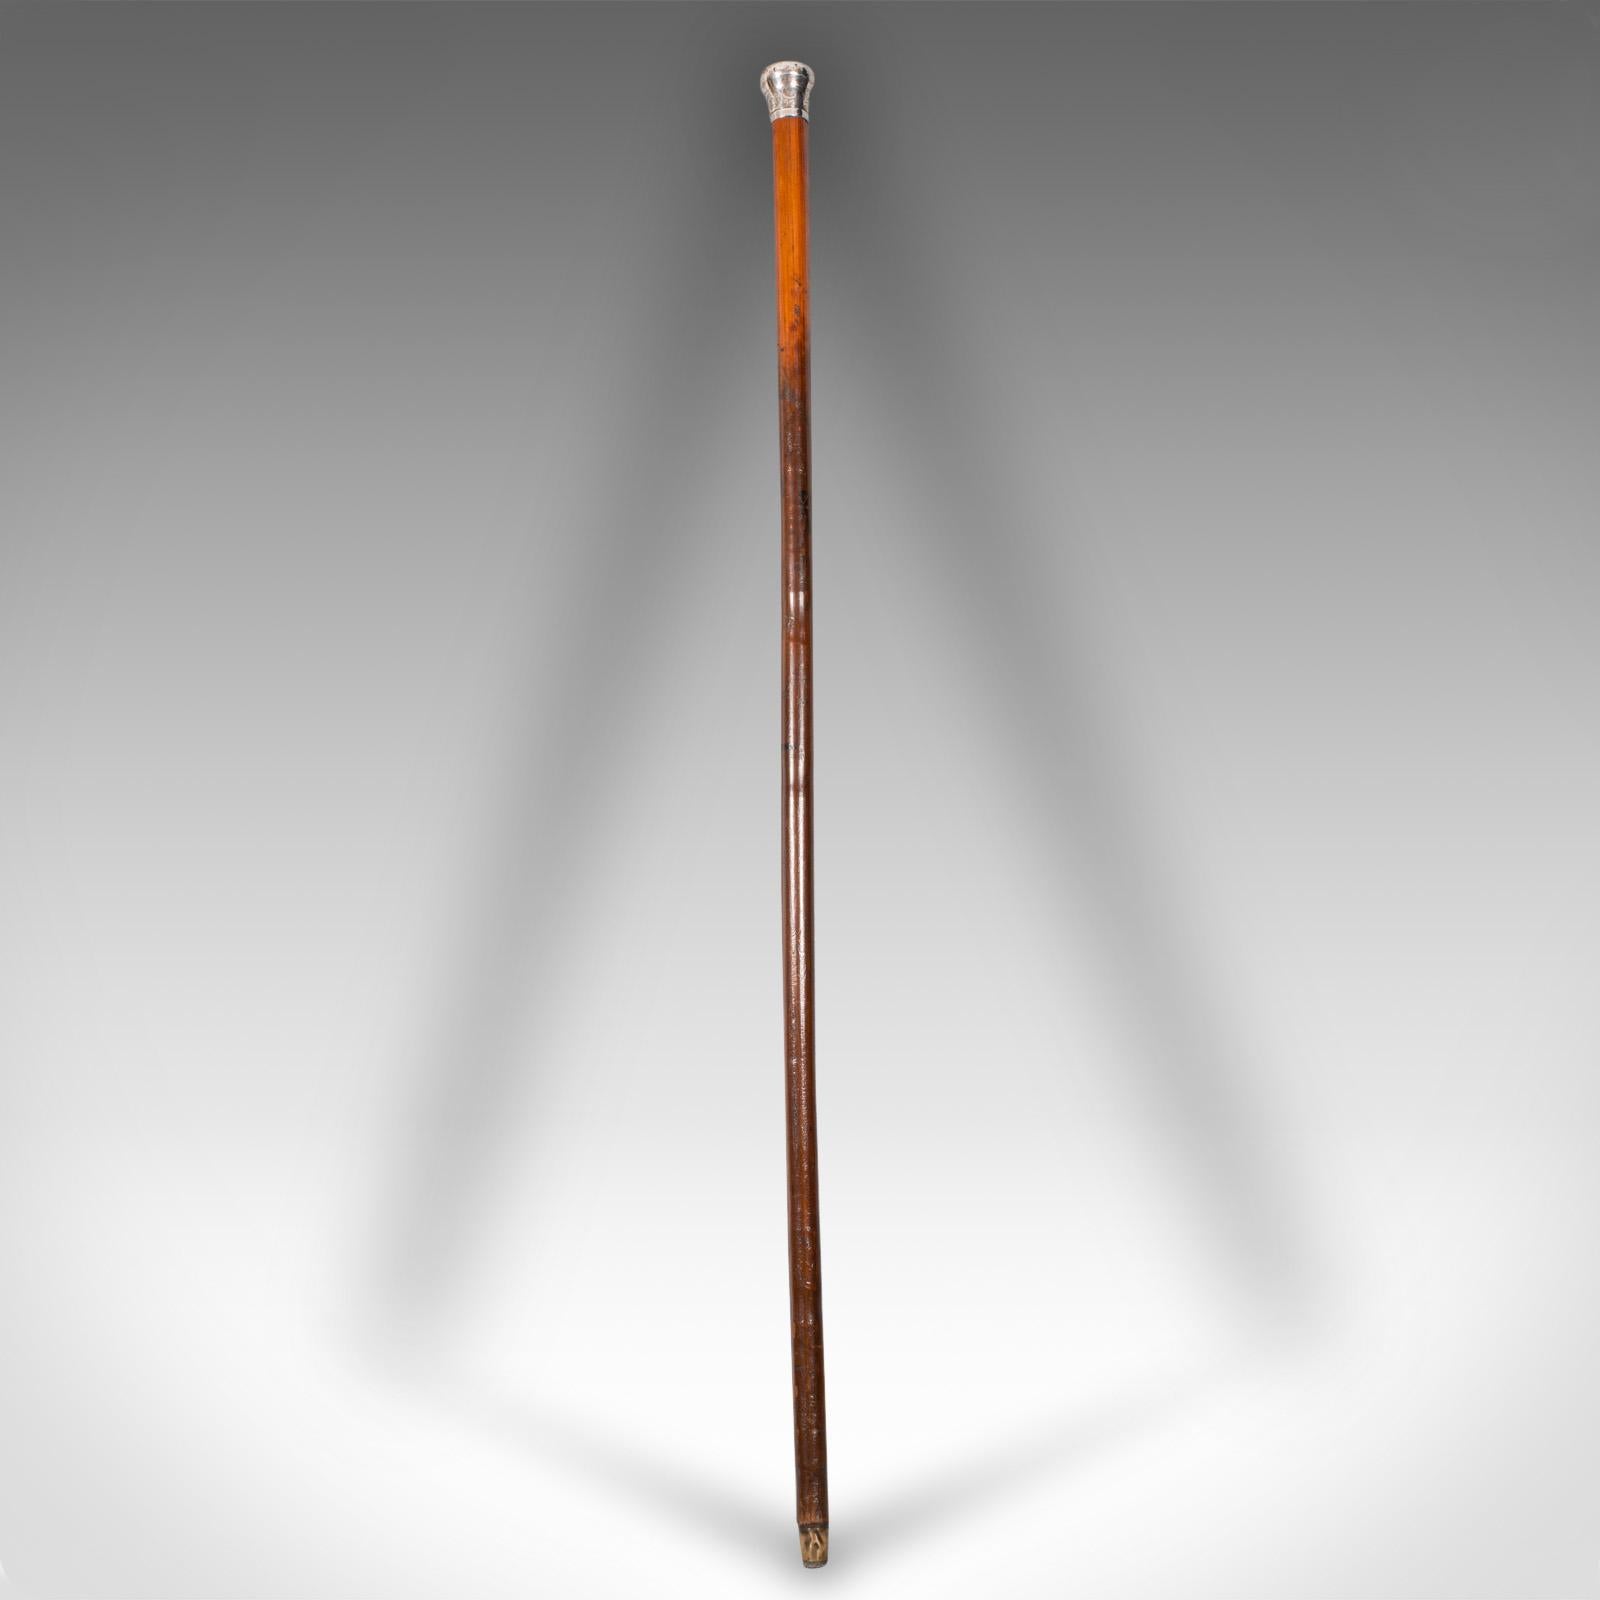 This is an antique dandy's walking cane. An English, fruitwood stick with hallmarked silver handle, dating to the late Victorian period, circa 1900.

Dashing gentleman's cane with delightful finish and appearance
Displays a desirable aged patina